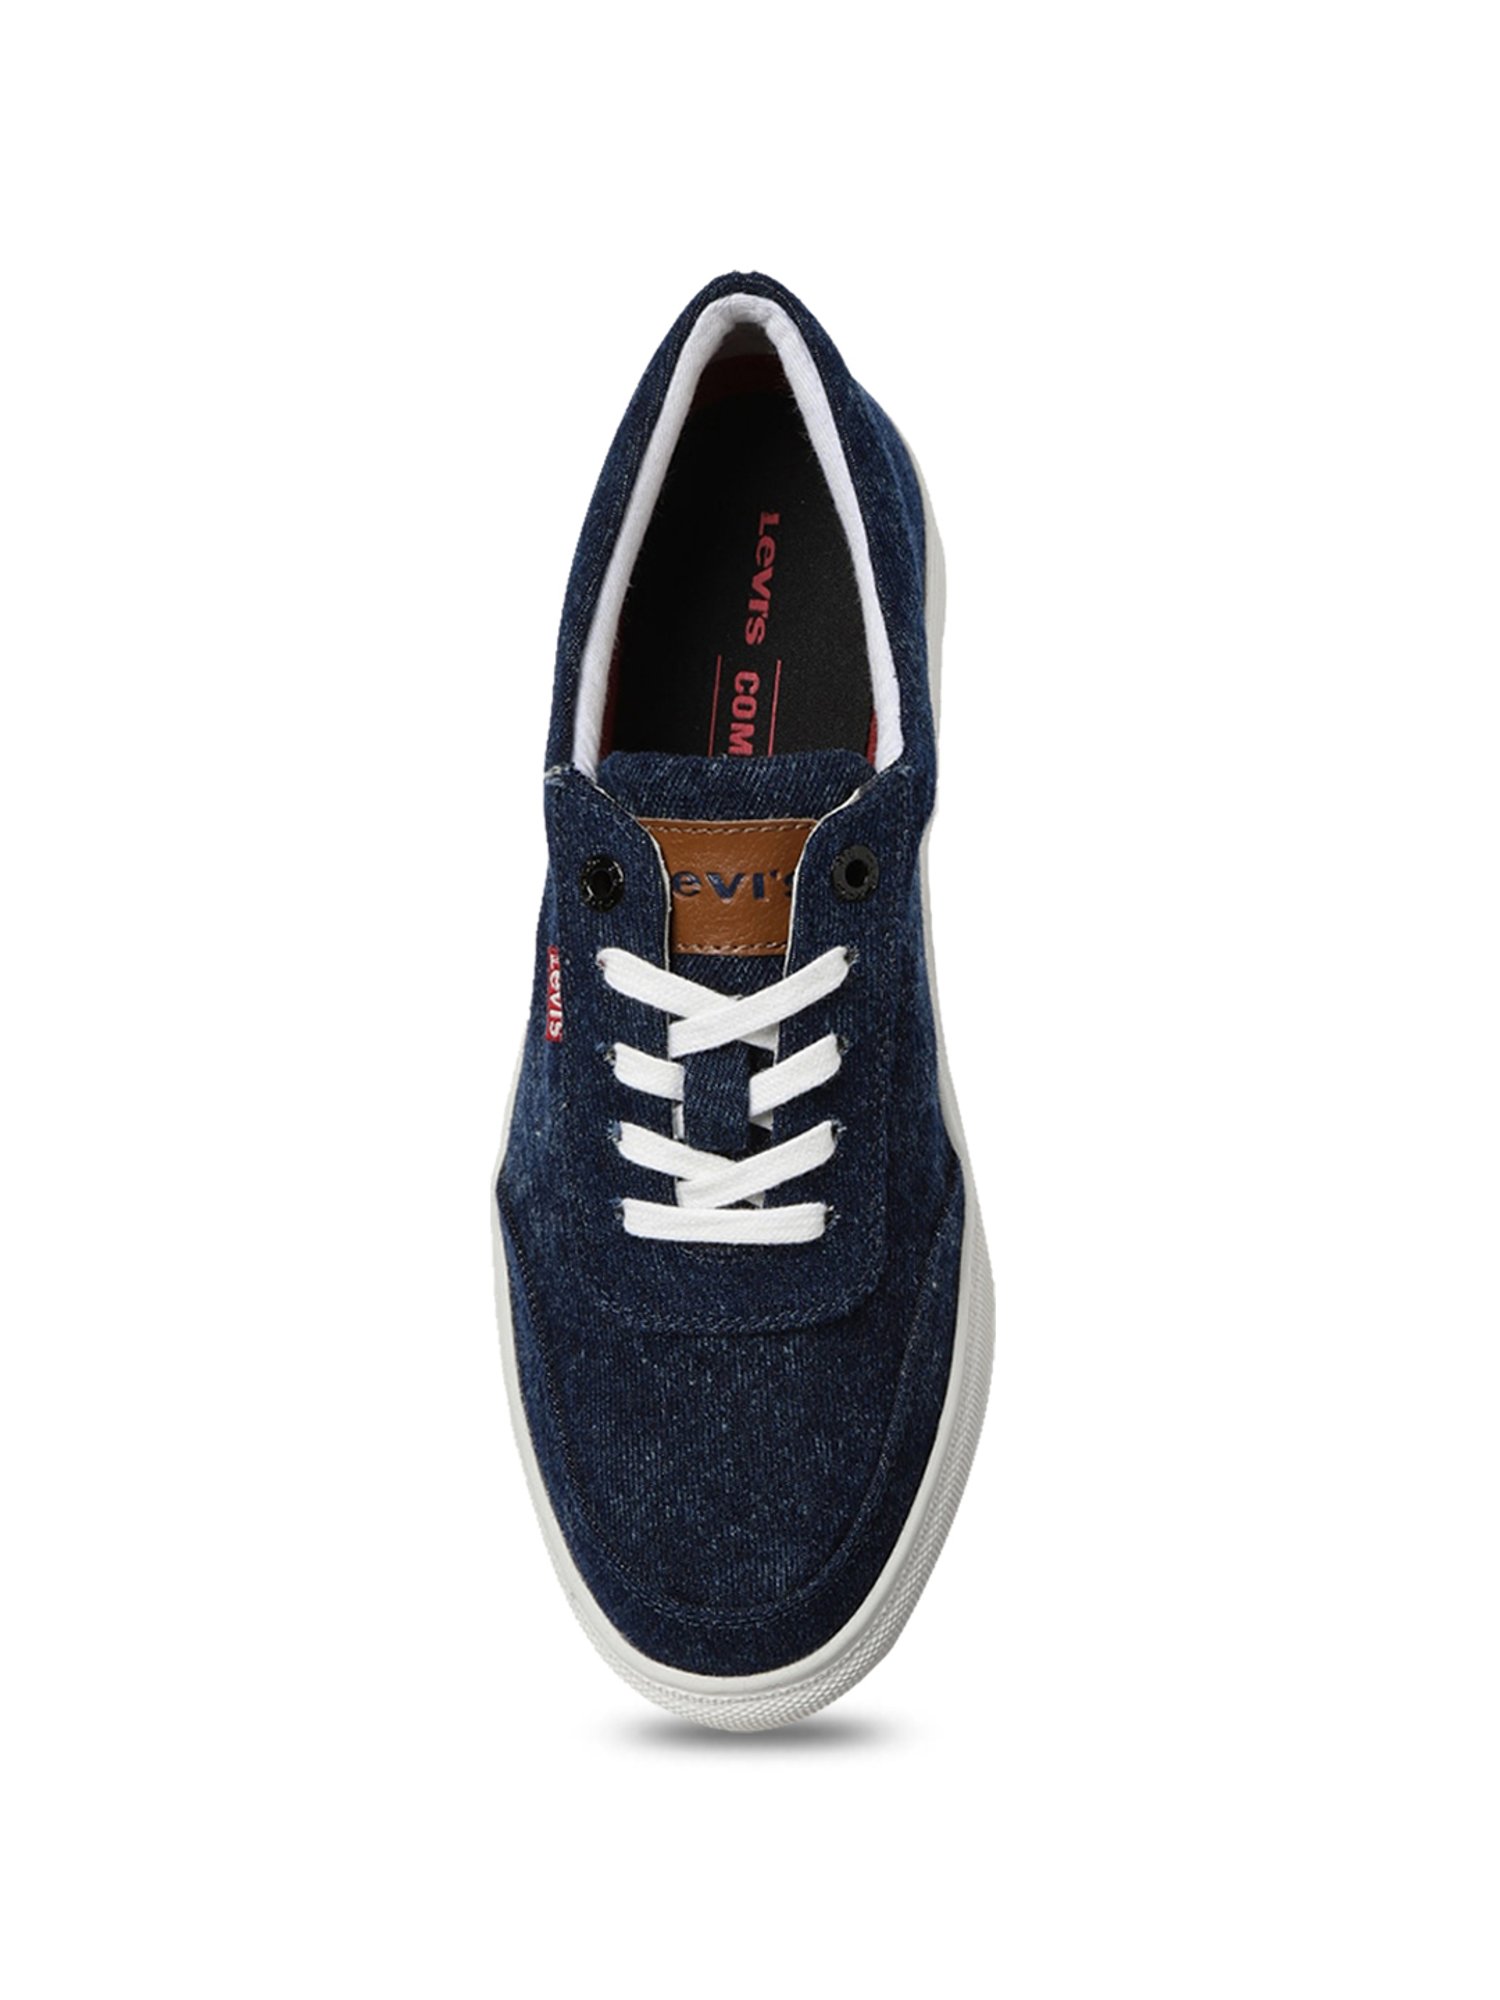 LEVI'S DENIM ANKLE Men Mid Ankle Sneakers For Men - Buy LIGHT BLUE Color LEVI'S  DENIM ANKLE Men Mid Ankle Sneakers For Men Online at Best Price - Shop  Online for Footwears